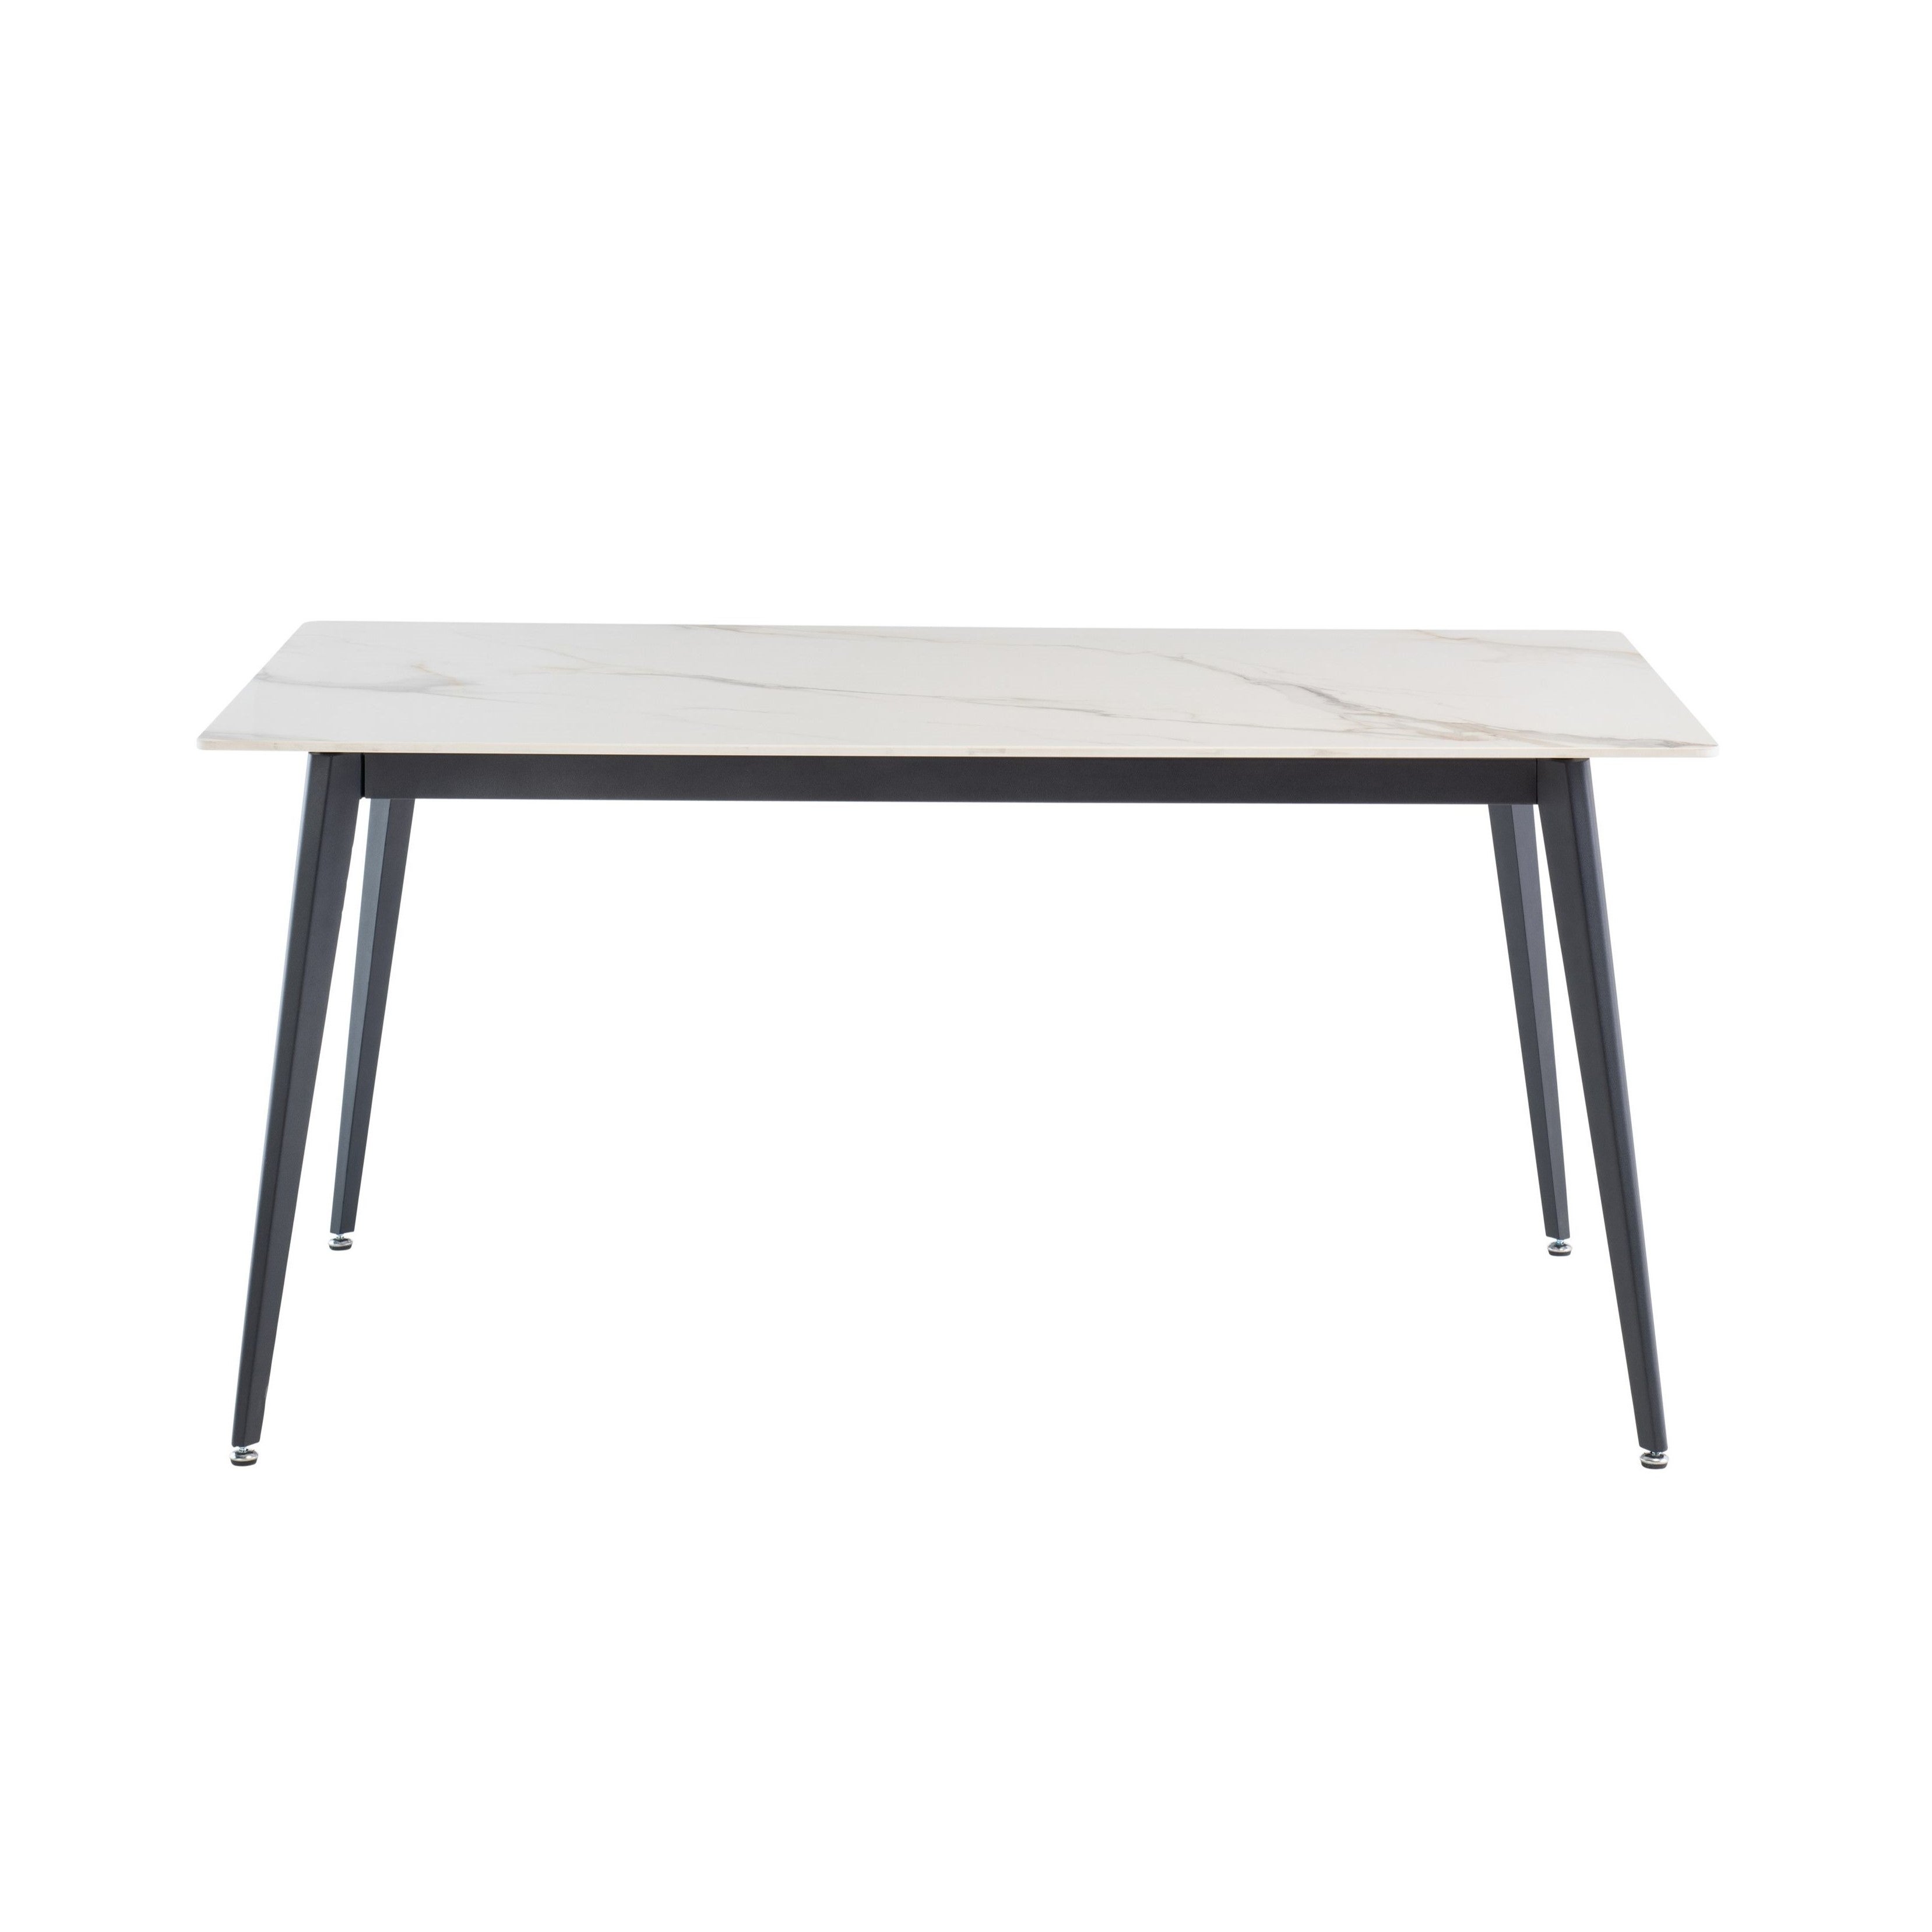 Ivy 6 Seater Dining Table, Sintered Stone Grey